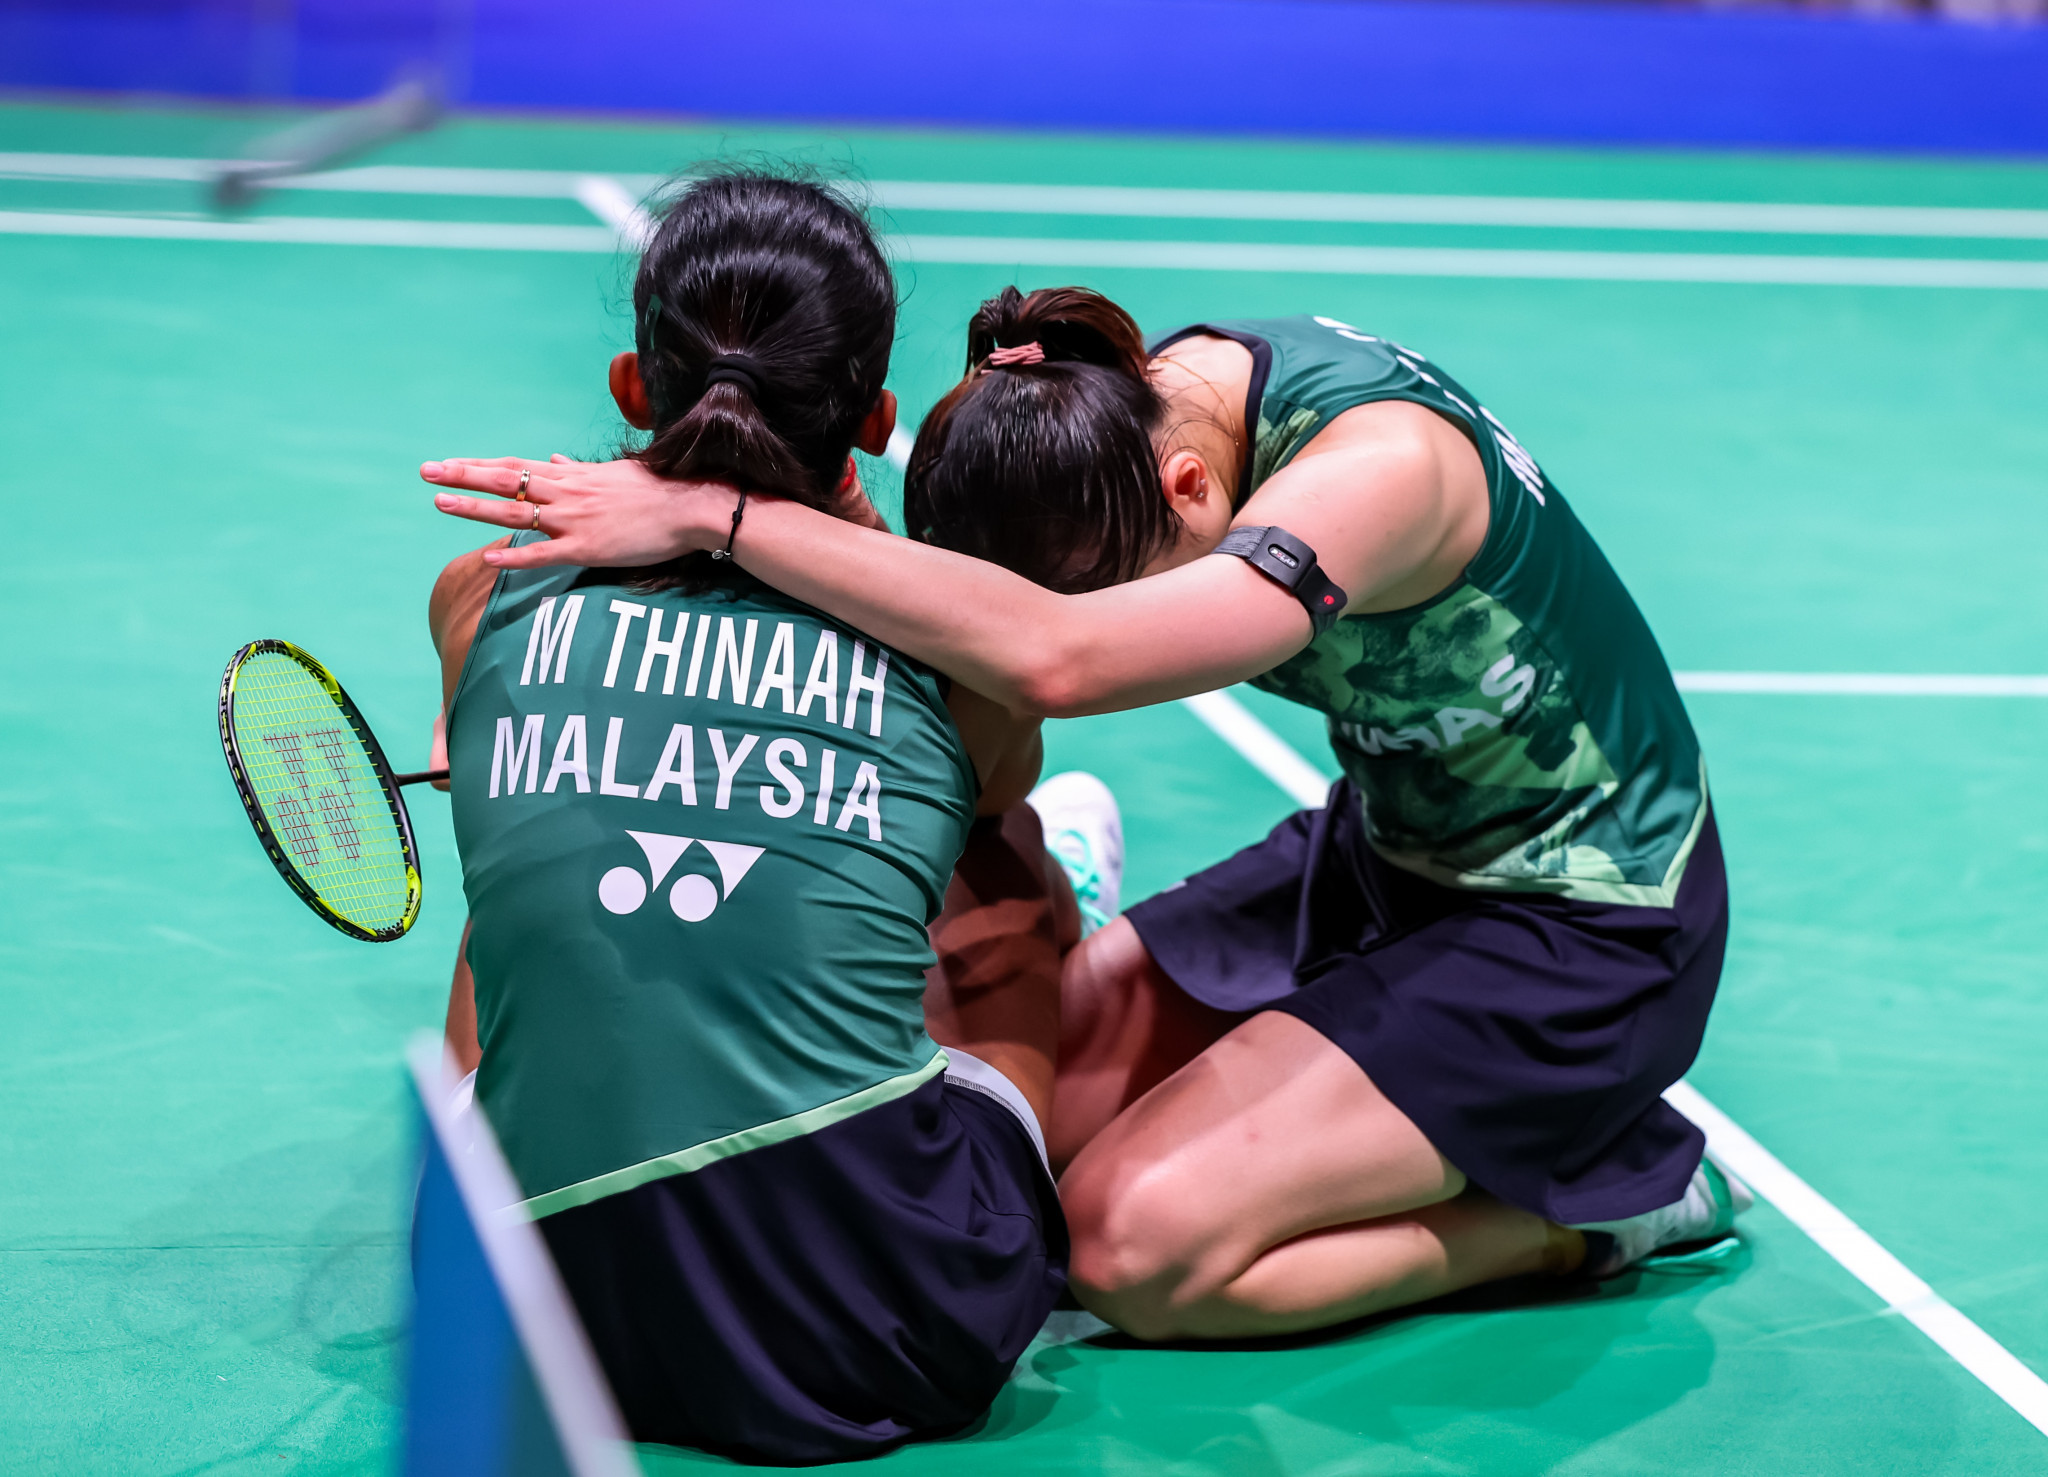 Malaysians Pearly Tan and Thinaah Muralitharan console each other after suffering an agonising defeat in the quarter-finals ©Badmintonphoto